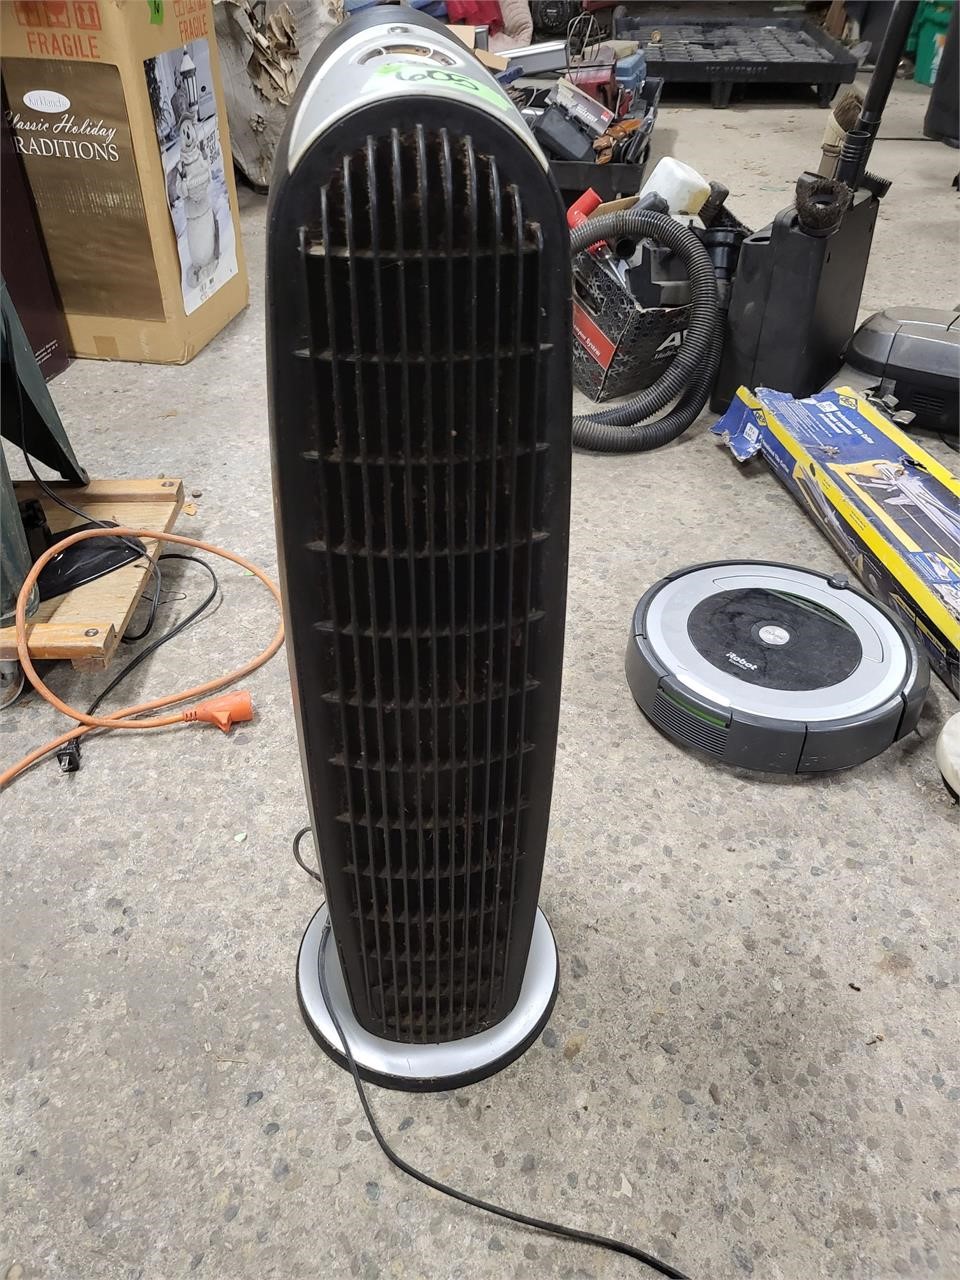 Tower fan tested working